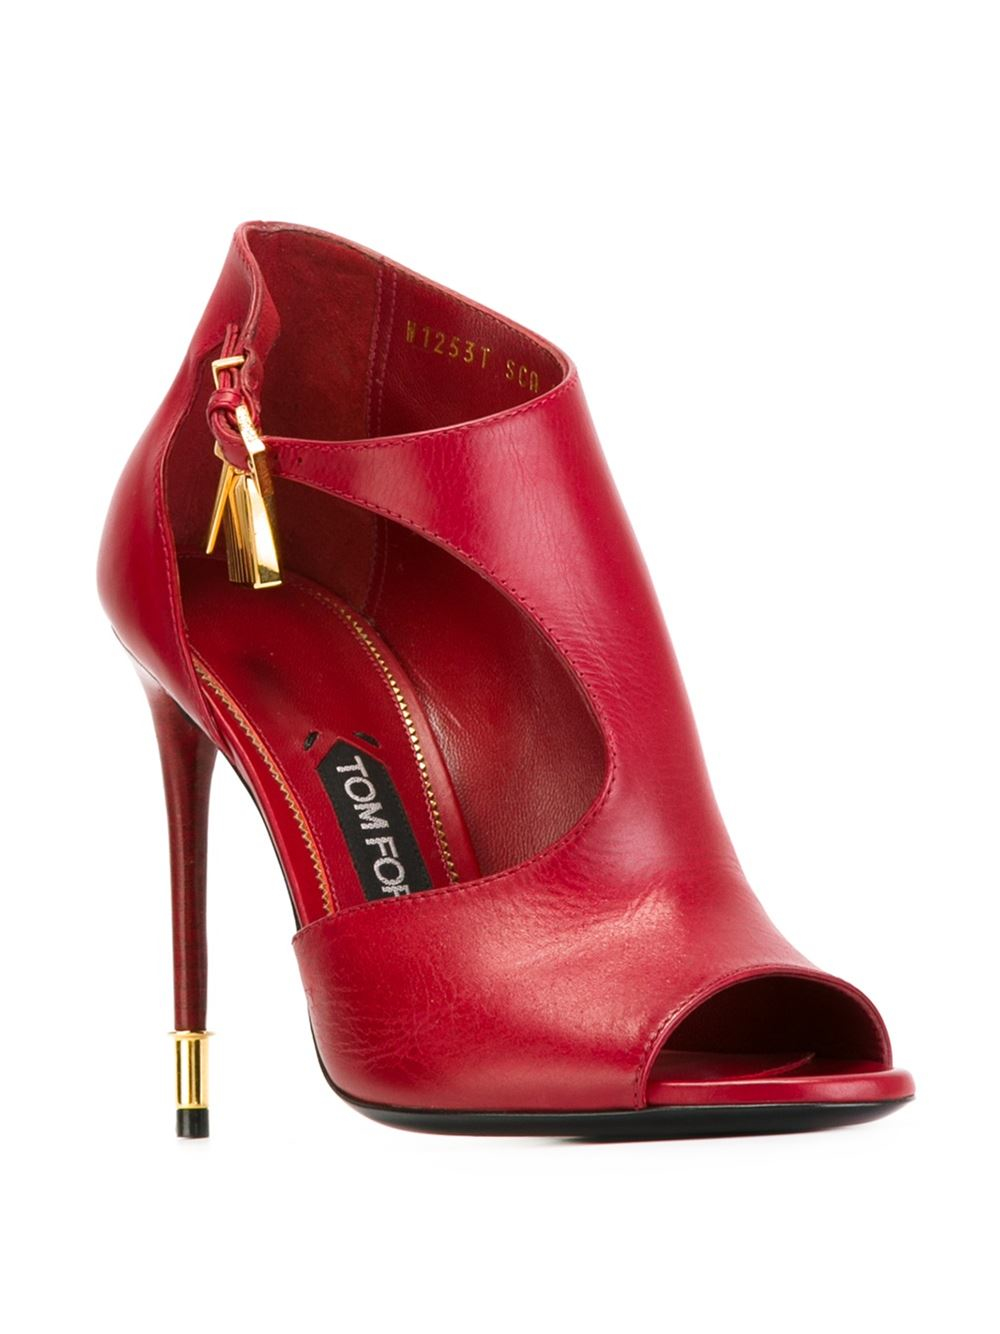 Lyst - Tom Ford Peep Toe Cut-out Stiletto Boots in Red